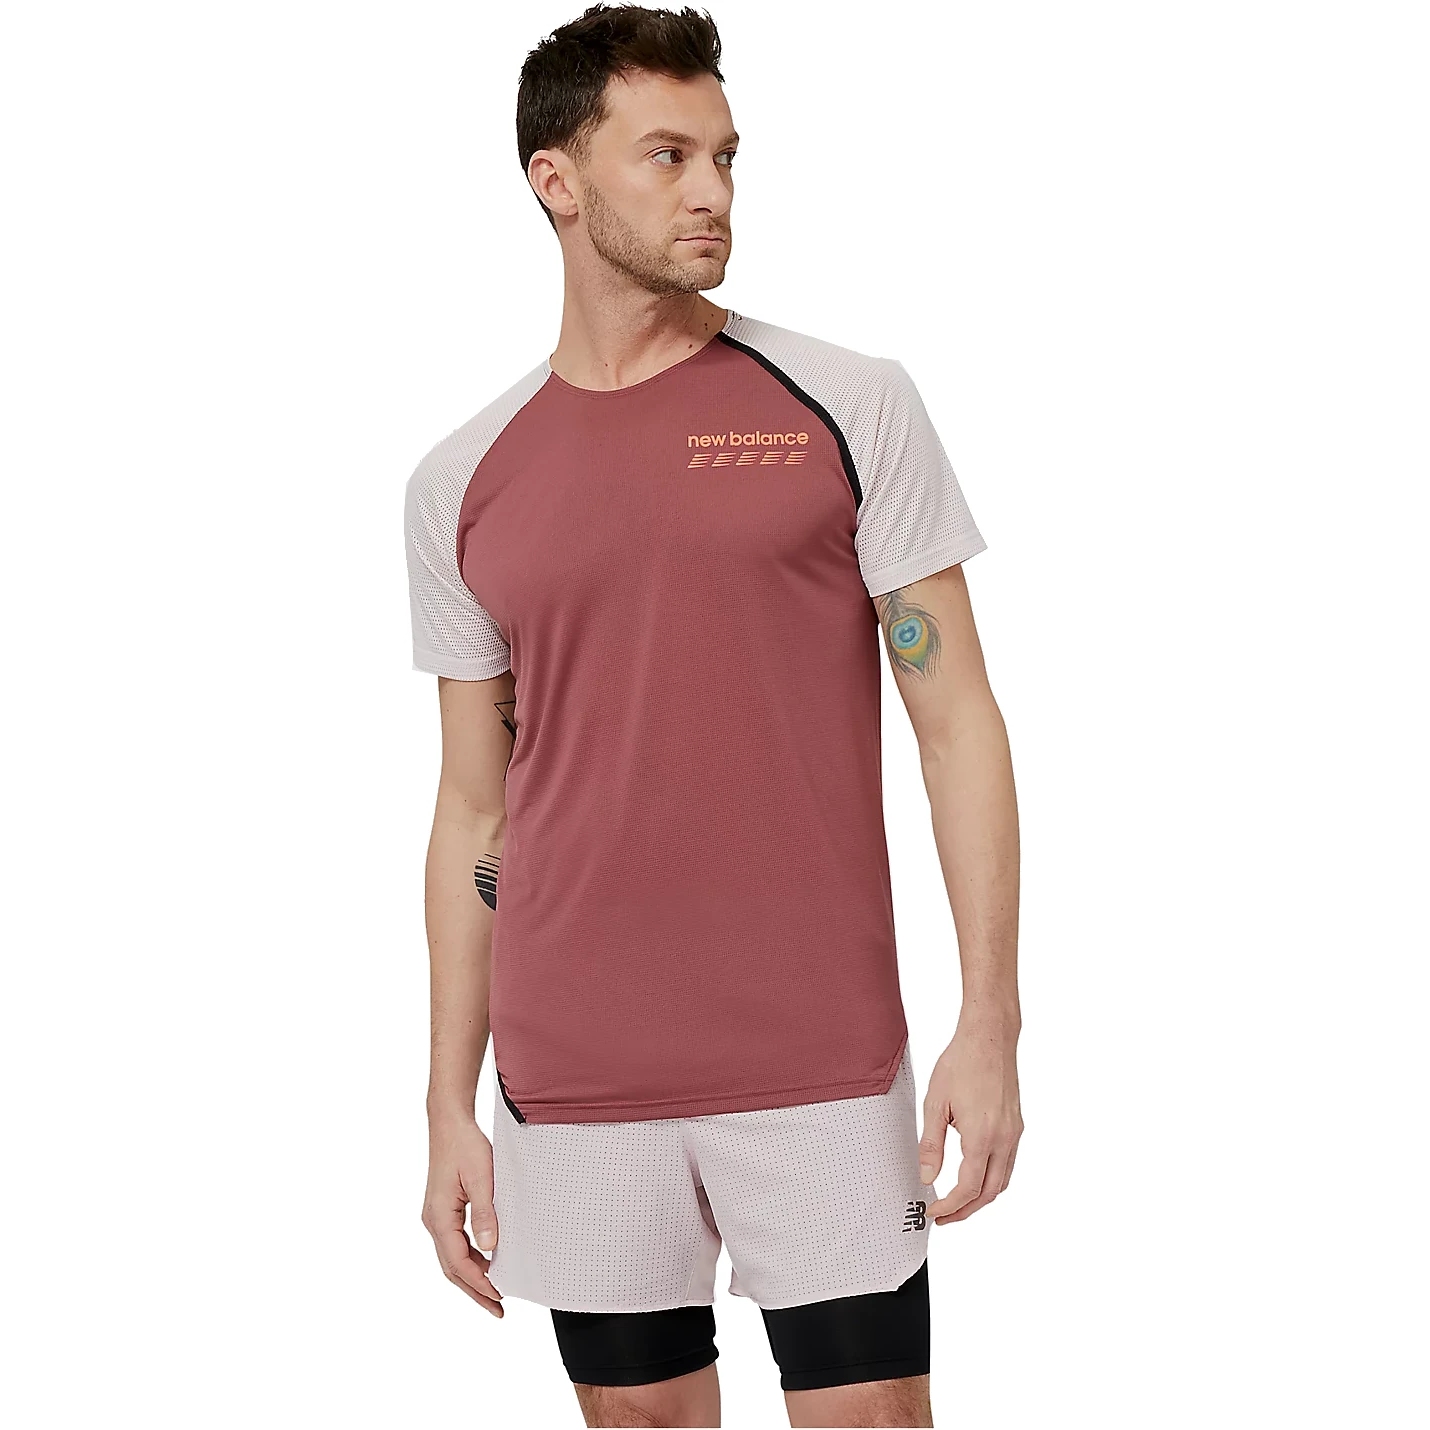 Picture of New Balance Accelerate Pacer Short Sleeve Shirt Men - Washed Burgundy